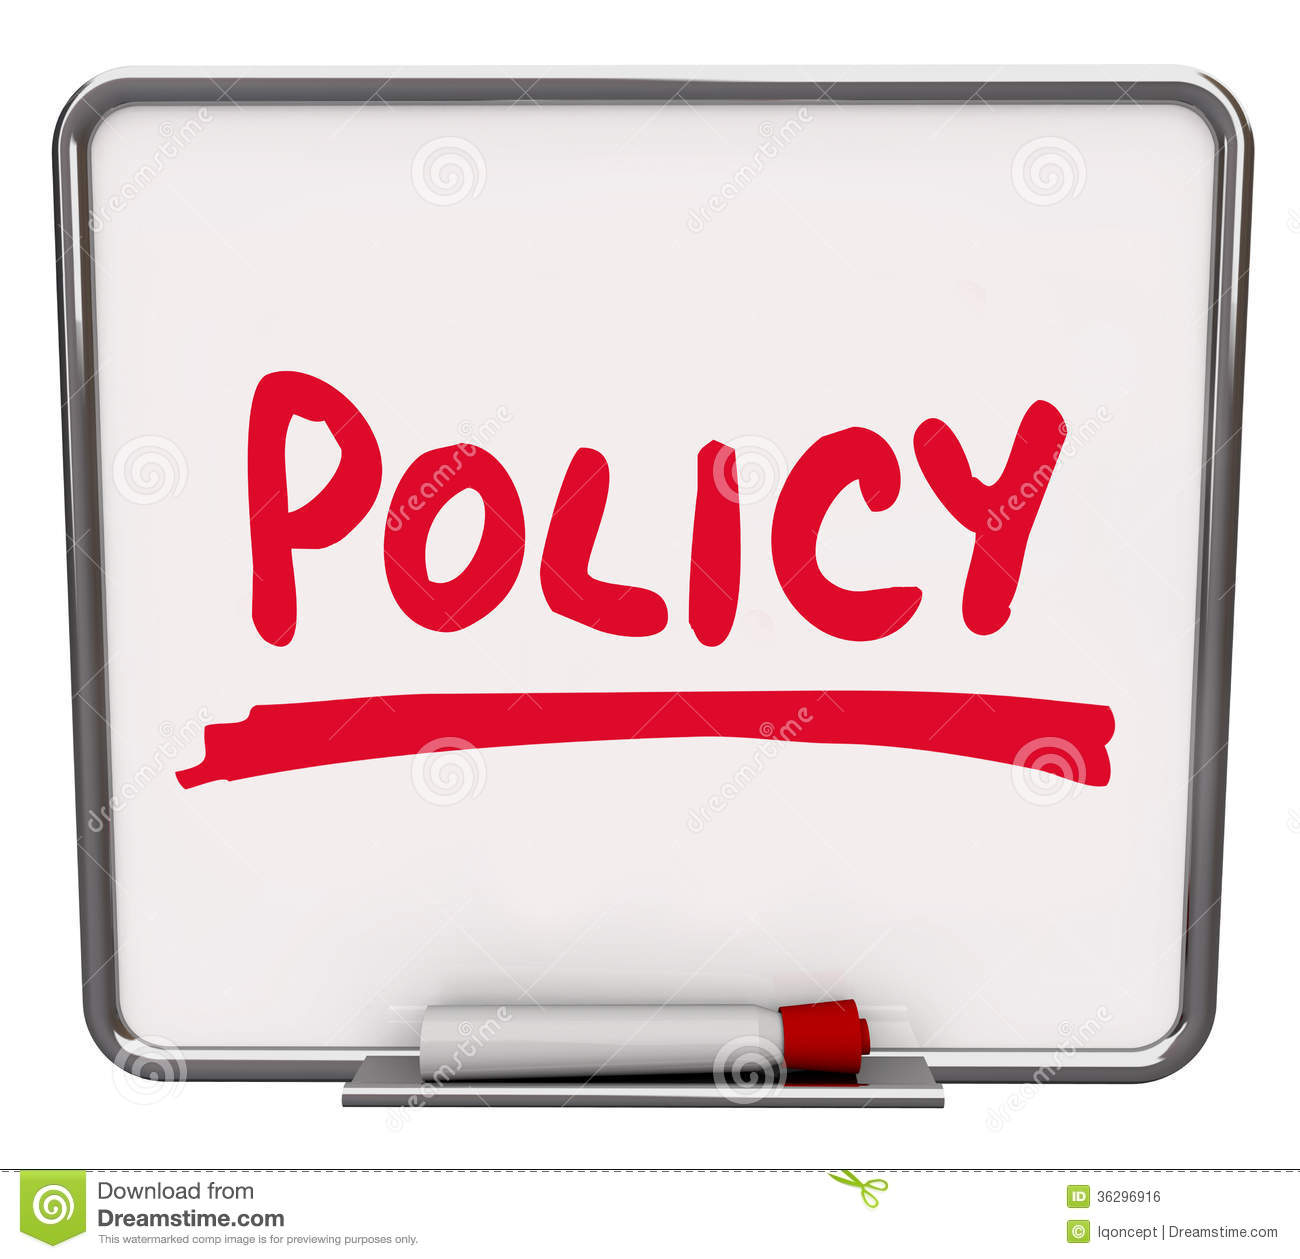 Policy Word Written On A Dry Erase Board With Red Marker To Illustrate